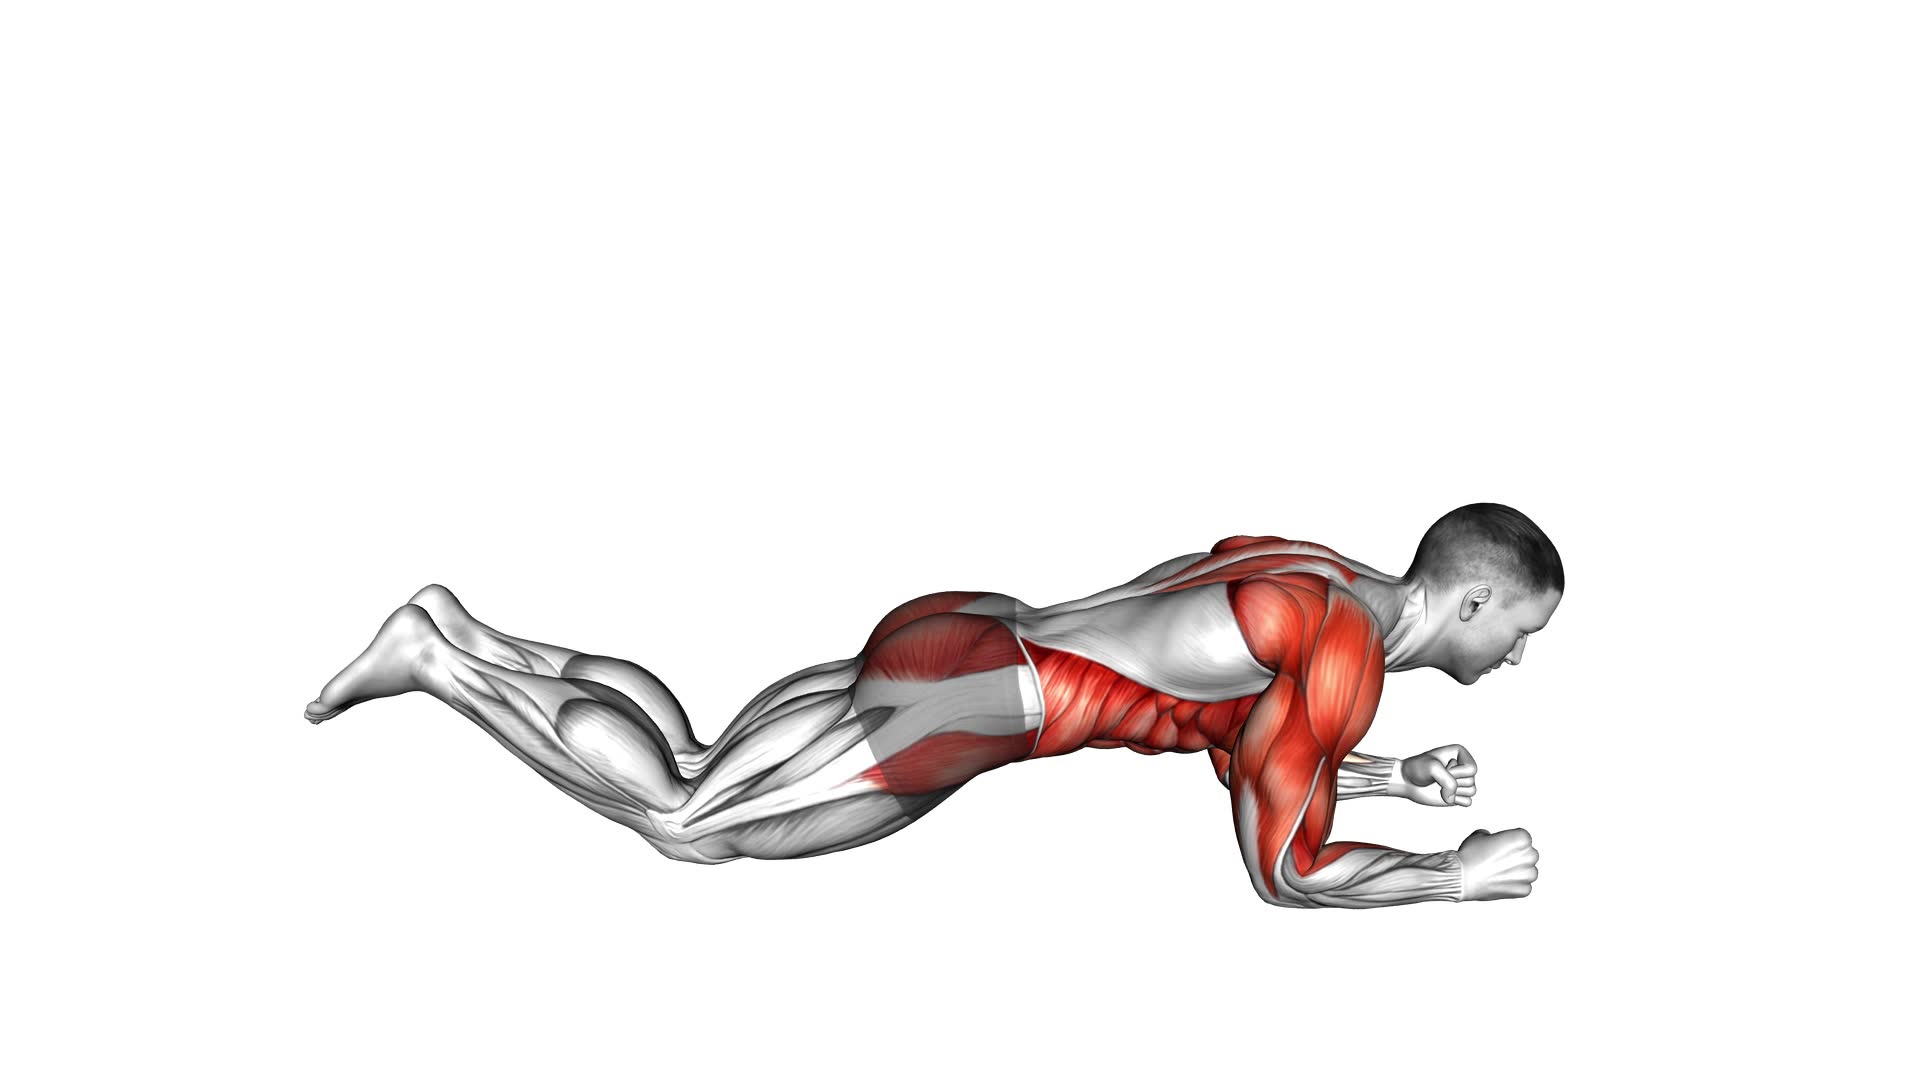 Kneeling Dynamic Plank (male) - Video Exercise Guide & Tips